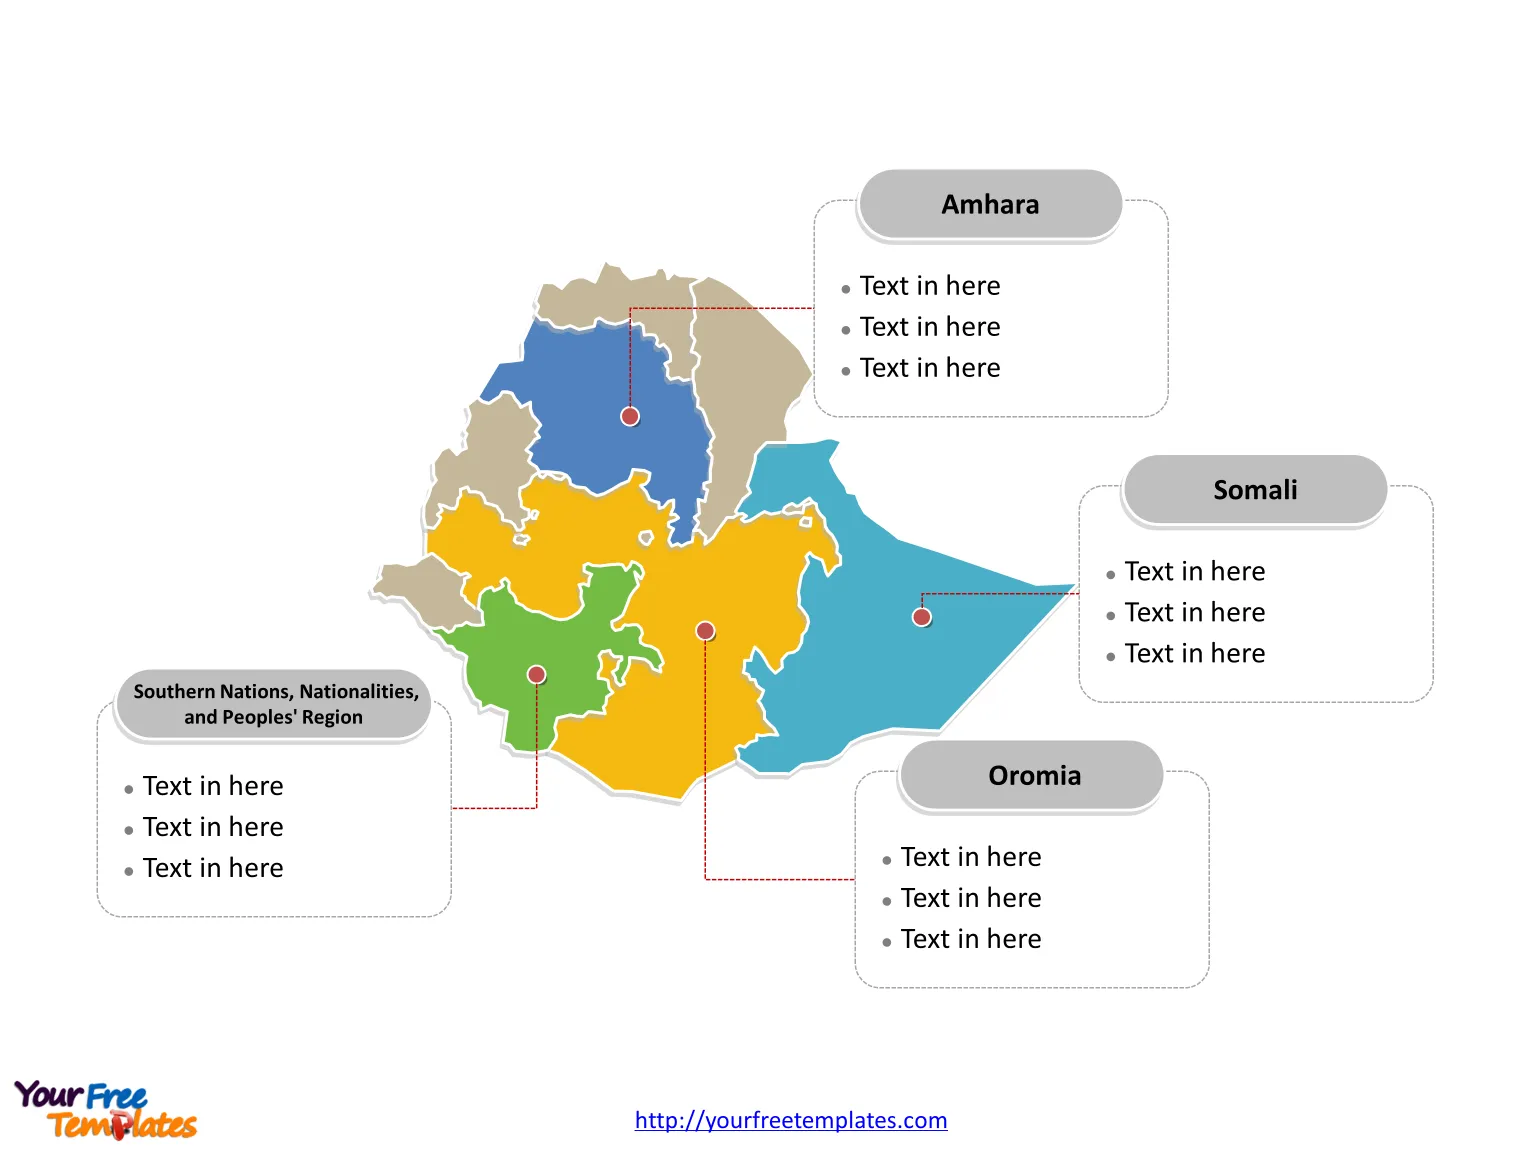 Ethiopia Political map labeled with major states